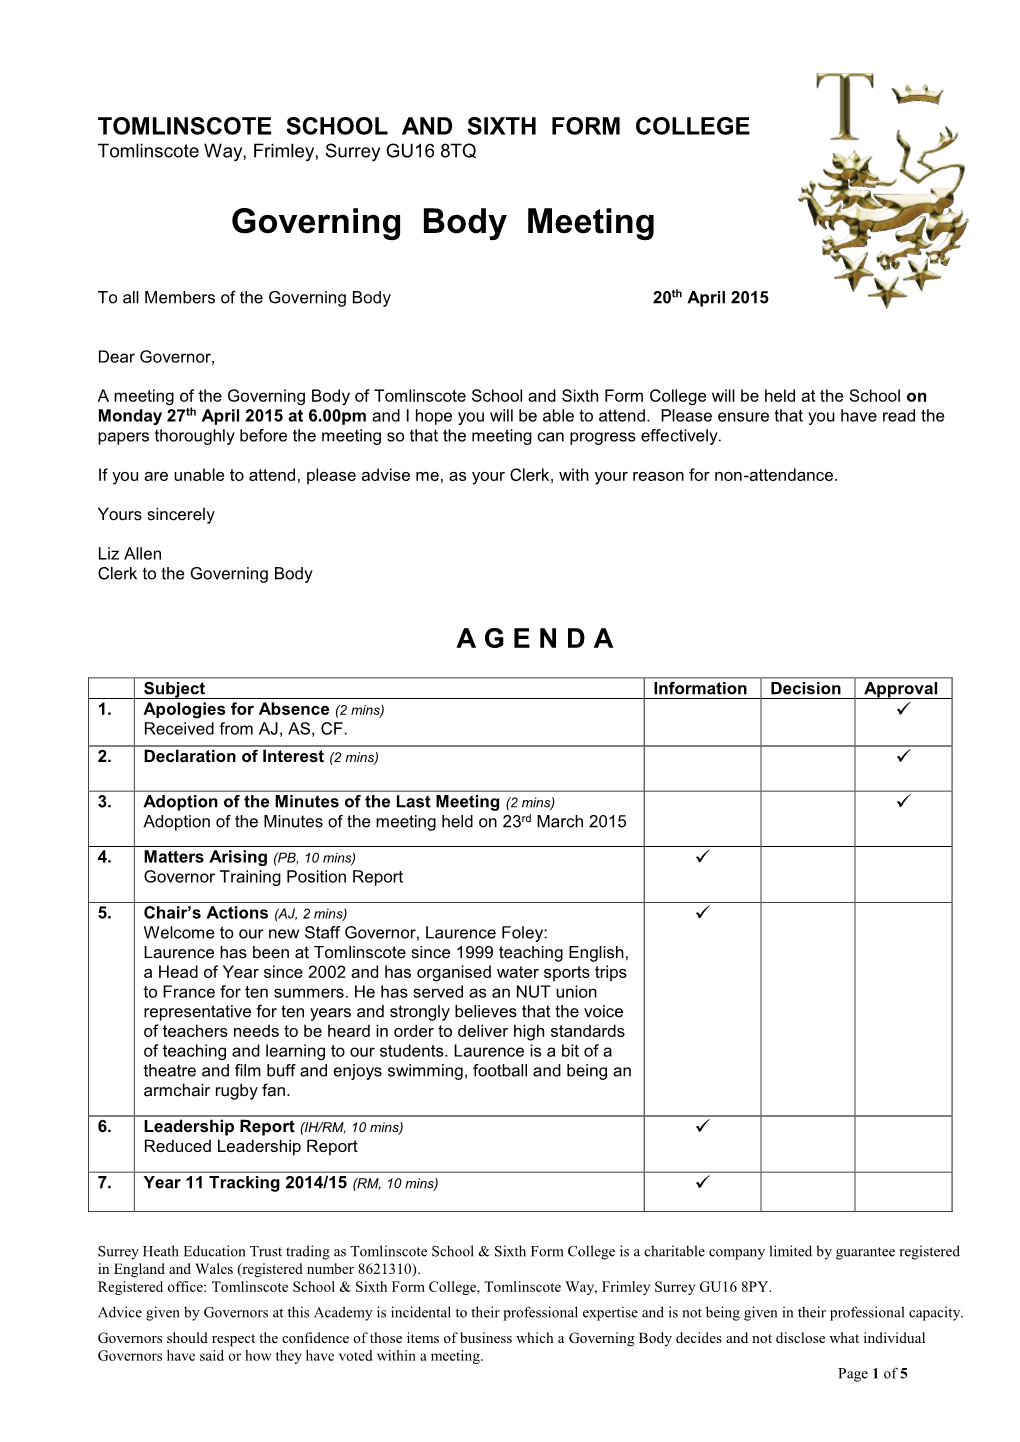 Governing Body Meeting